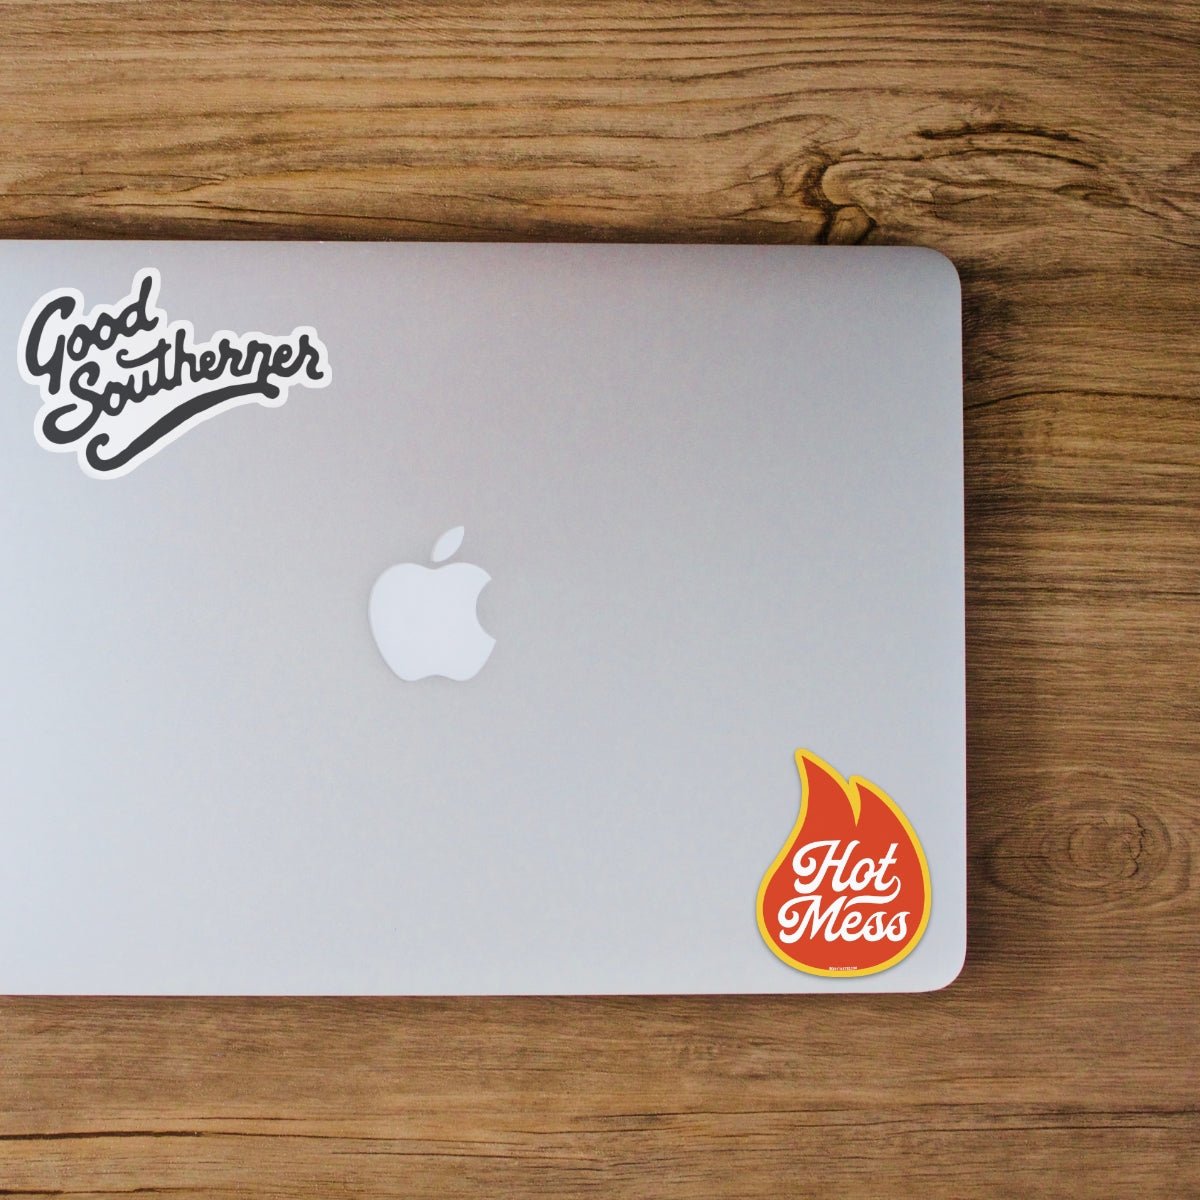 Good Southerner Hot Mess Flame Sticker